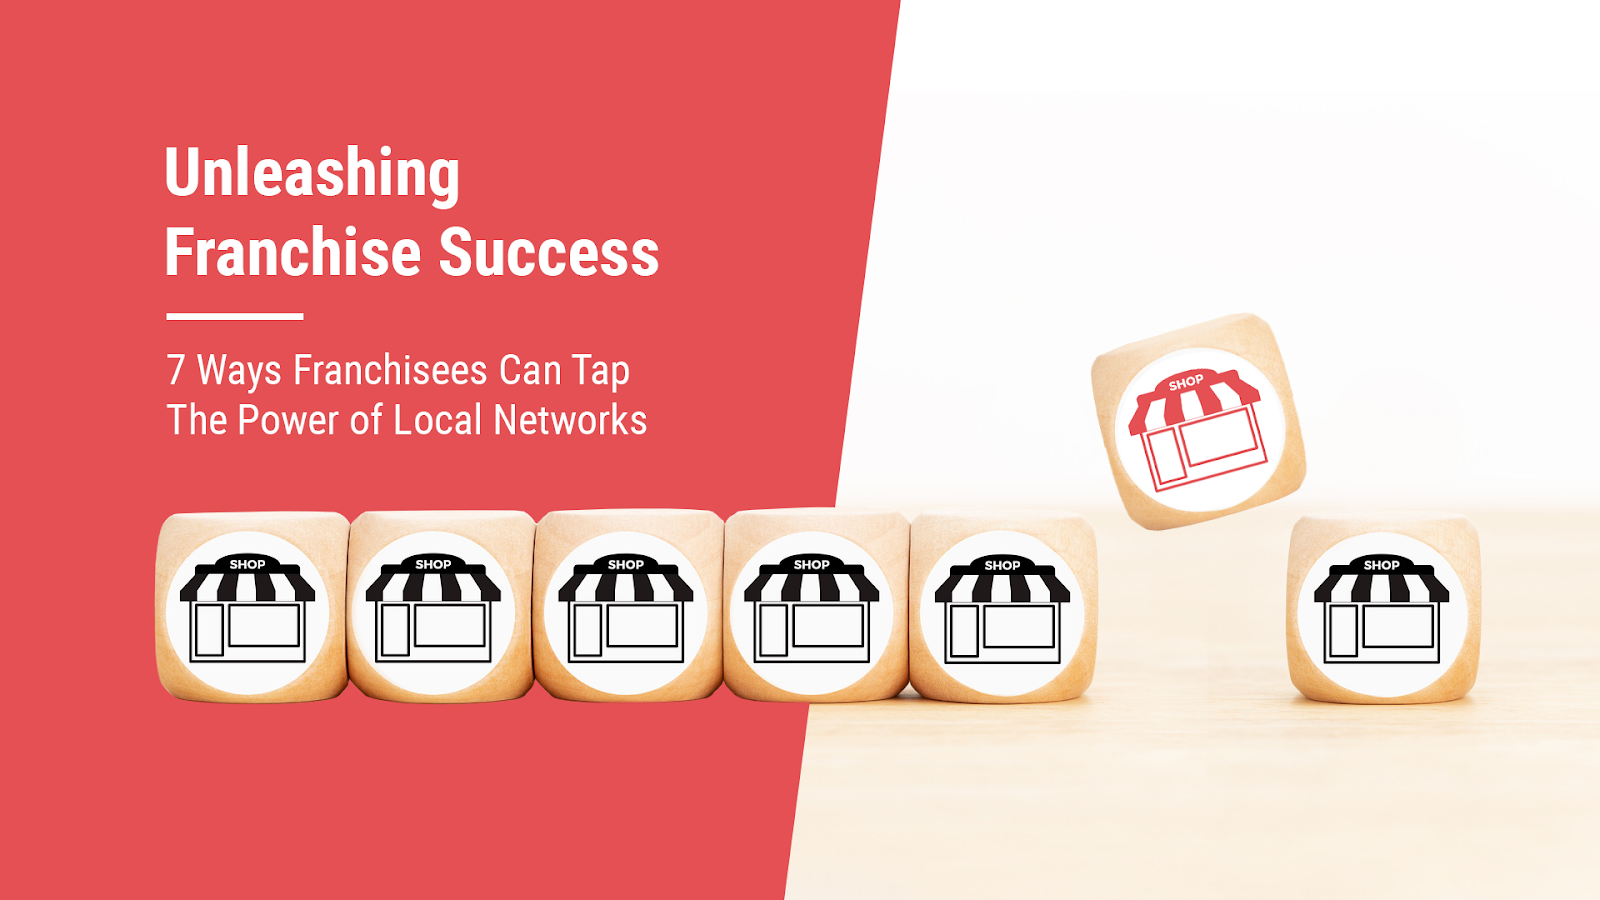 Unleashing Franchise Success: 7 Ways Franchisees Can Tap The Power of Local Networks